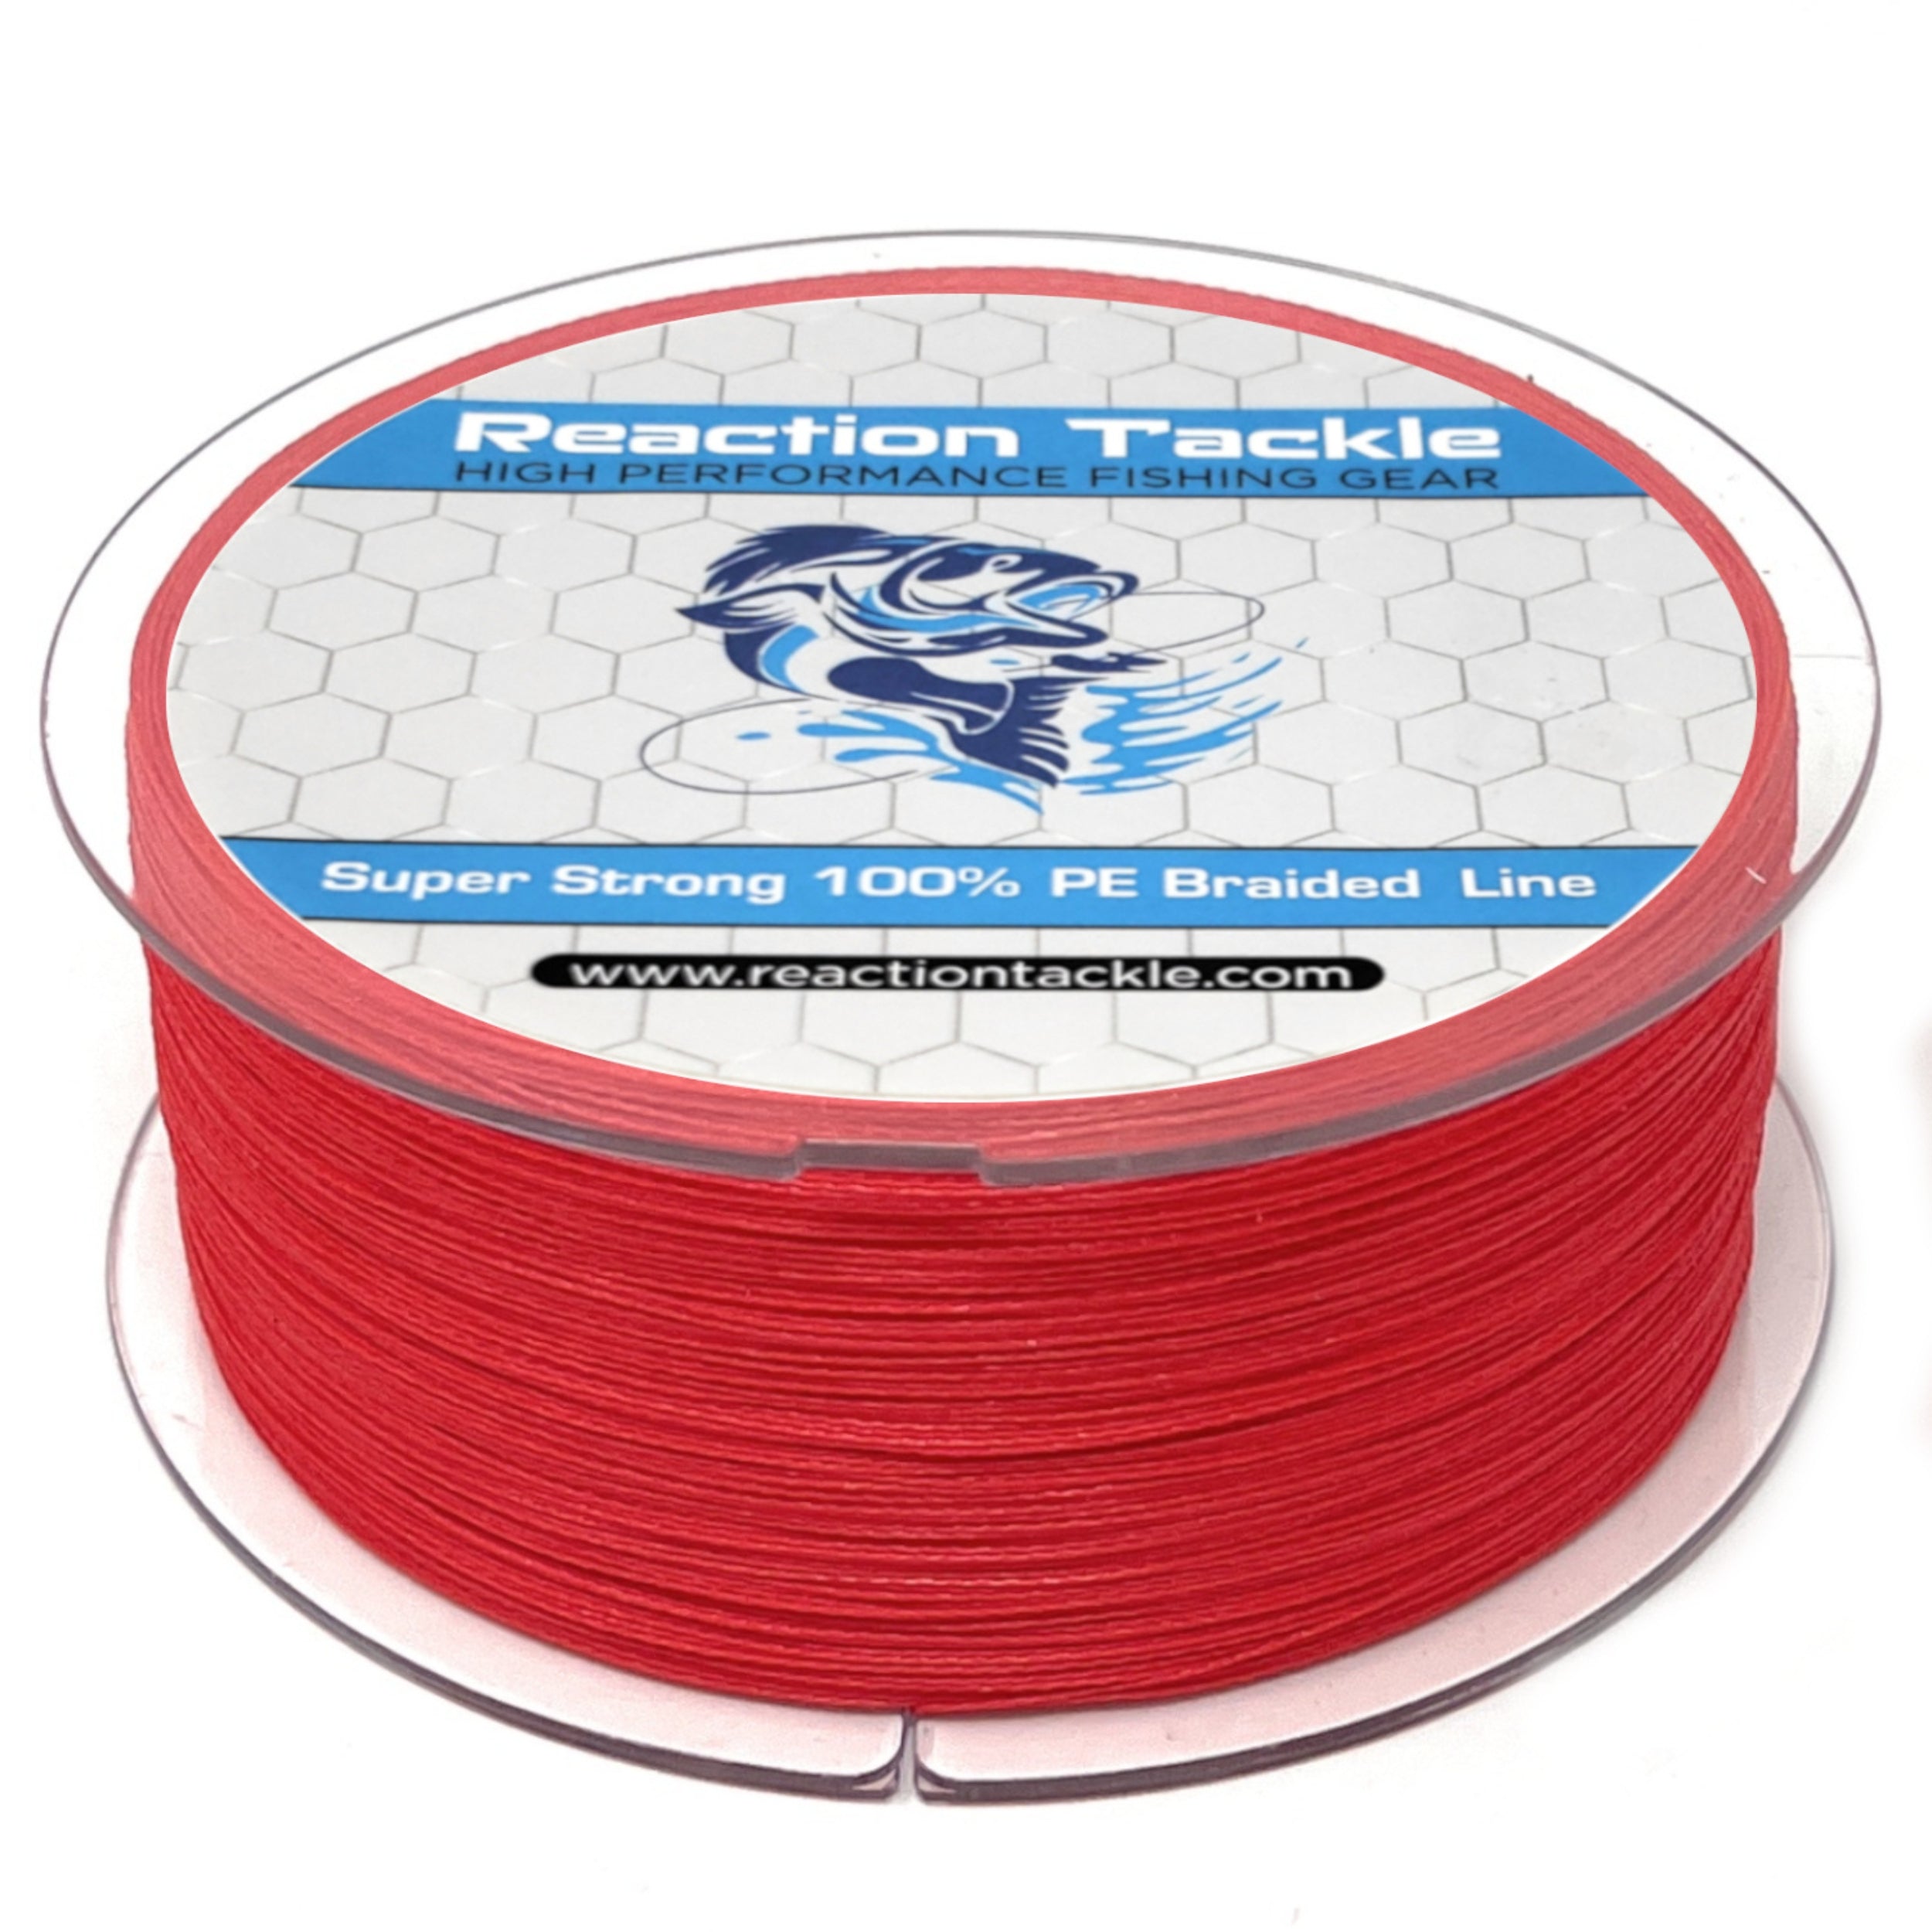 Reaction Tackle No Fade Red 80lb 300yds, Size: 80 lbs